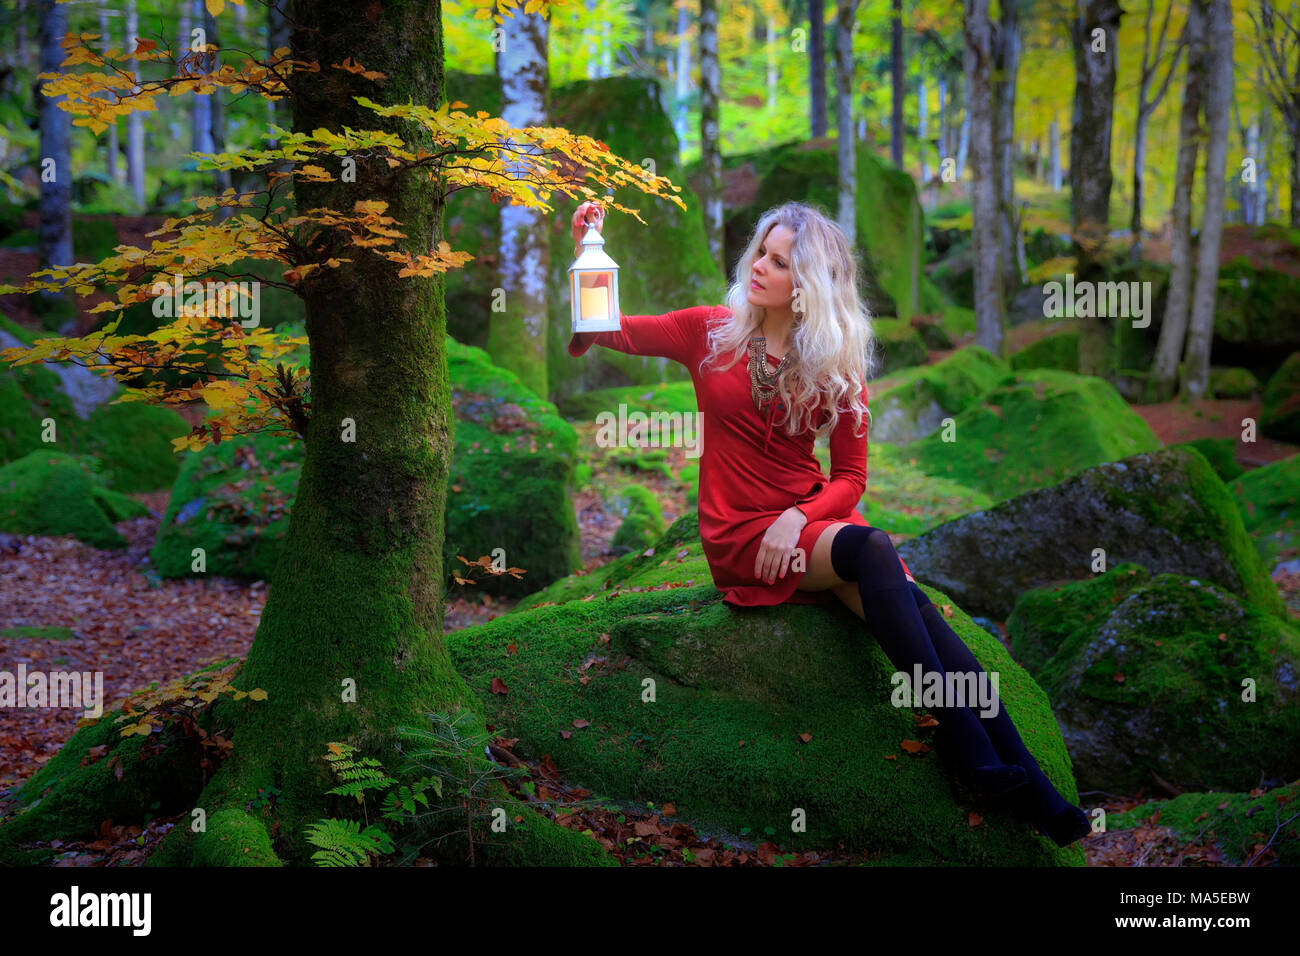 Girl in red dress sit on a rock with musk looking at a tree with a lantern, foresta di masino, valmasino, lombardy, italy Stock Photo